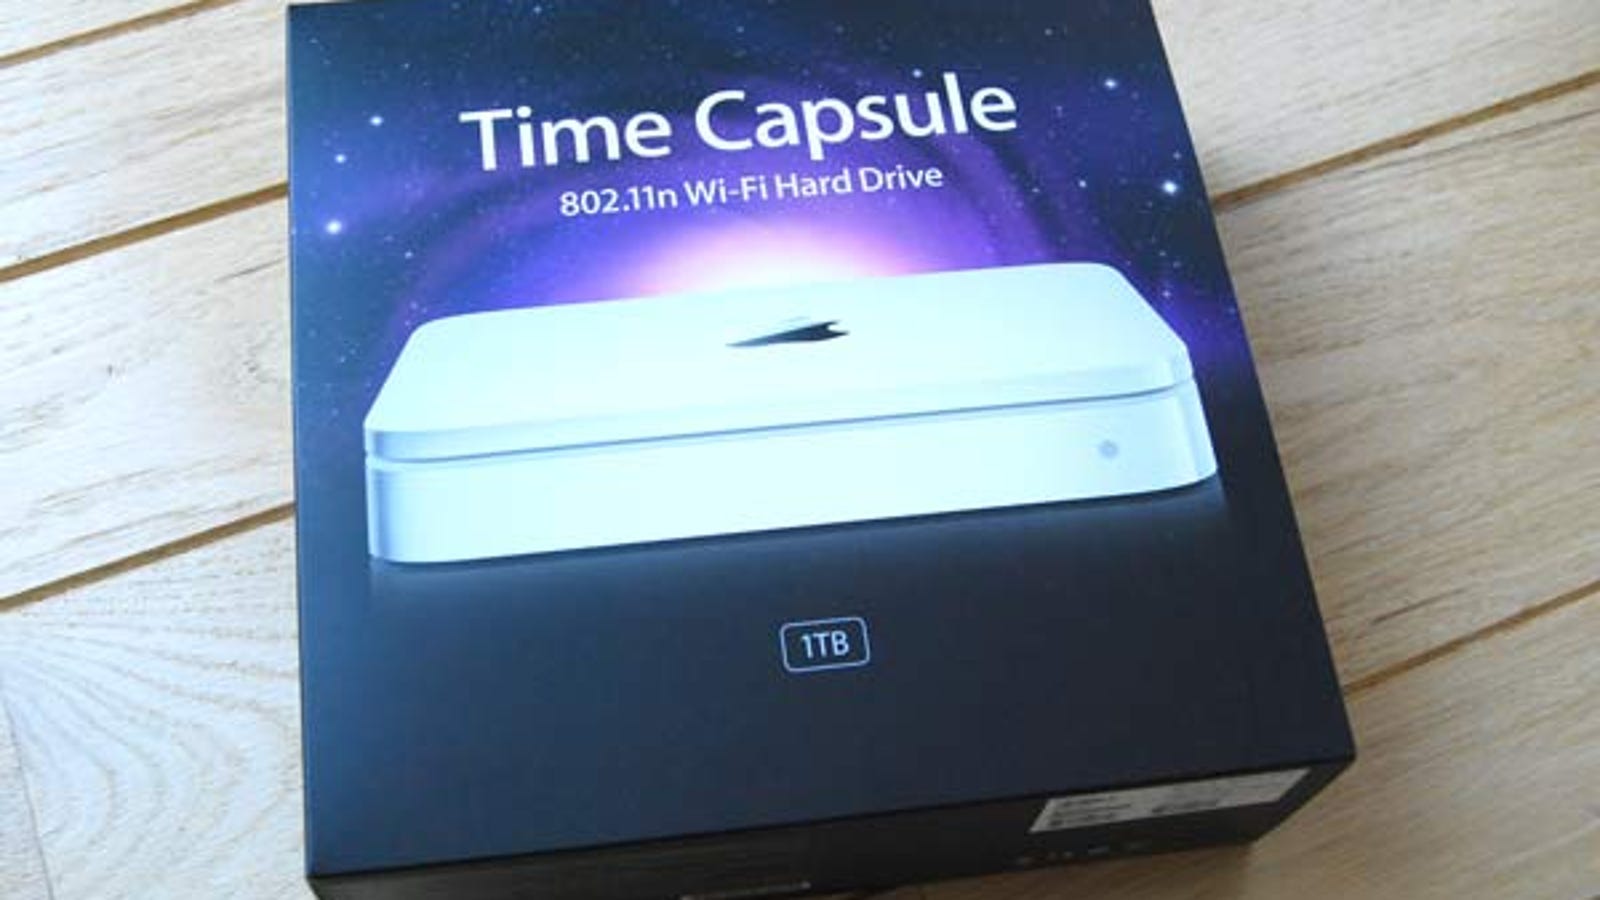 New Time Capsule, AirPort Will Run WiFi B/G and N Simultaneously